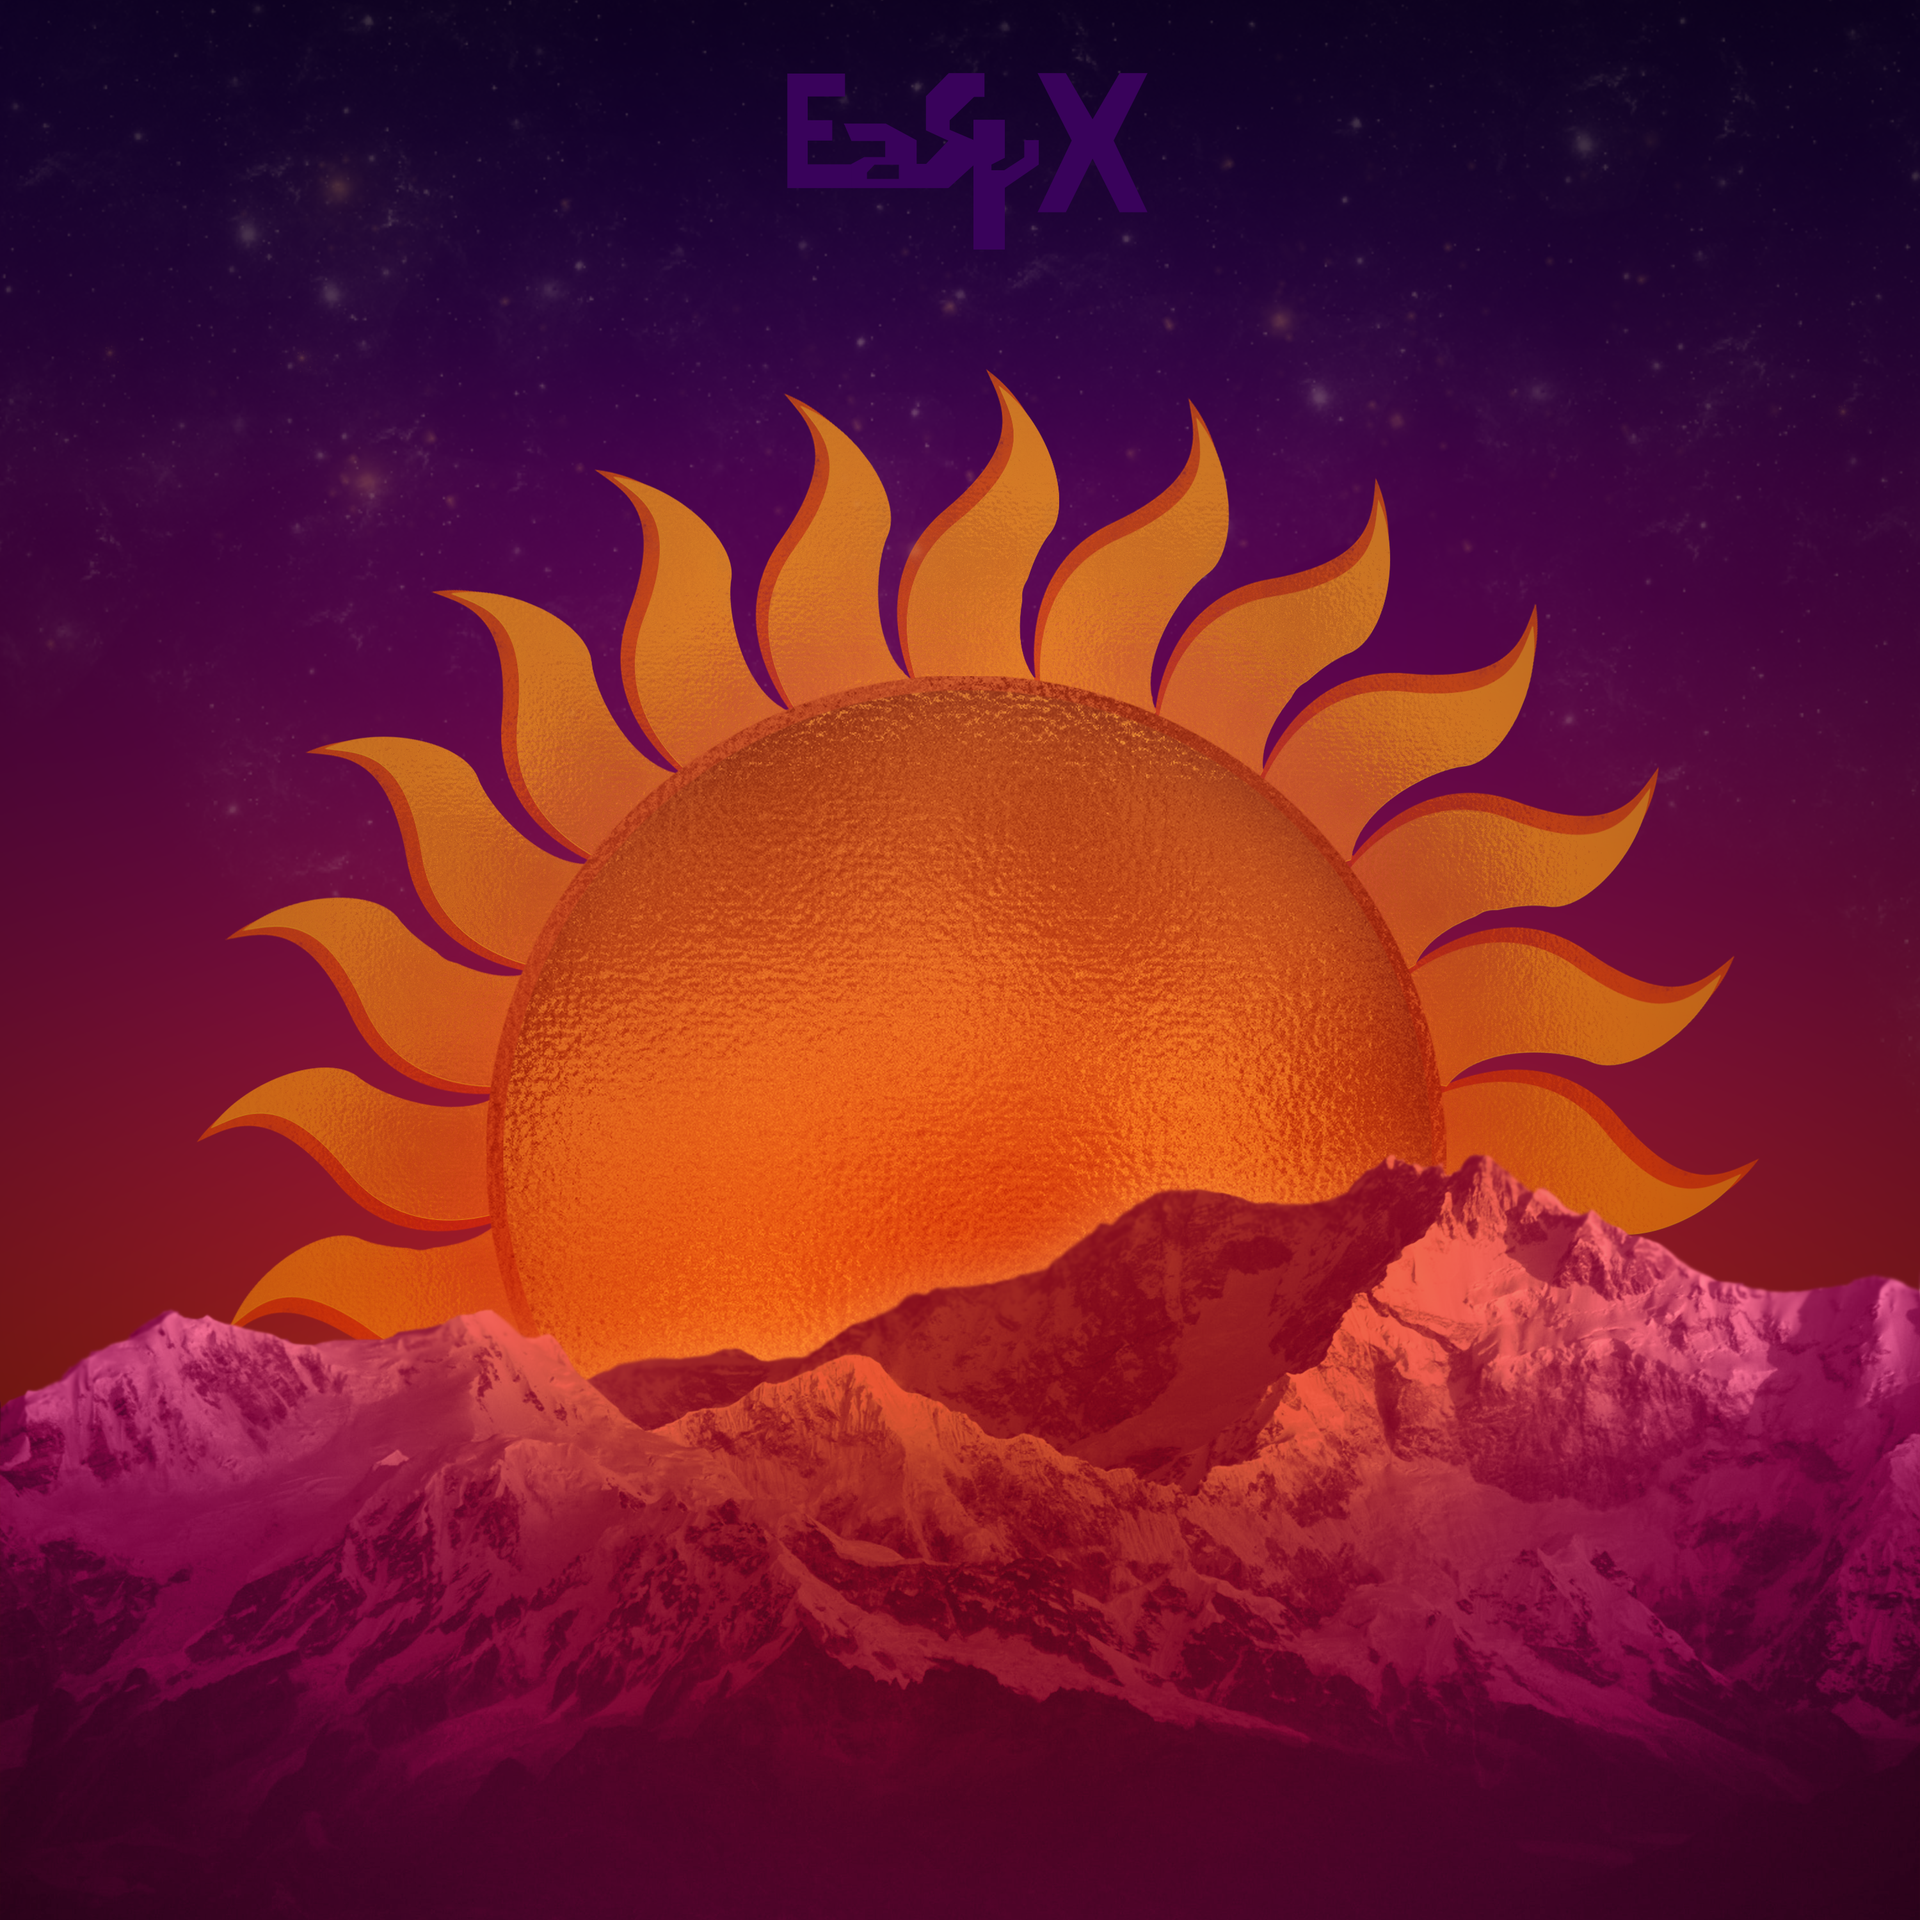 easyx/pure-stardust-infrared-mix